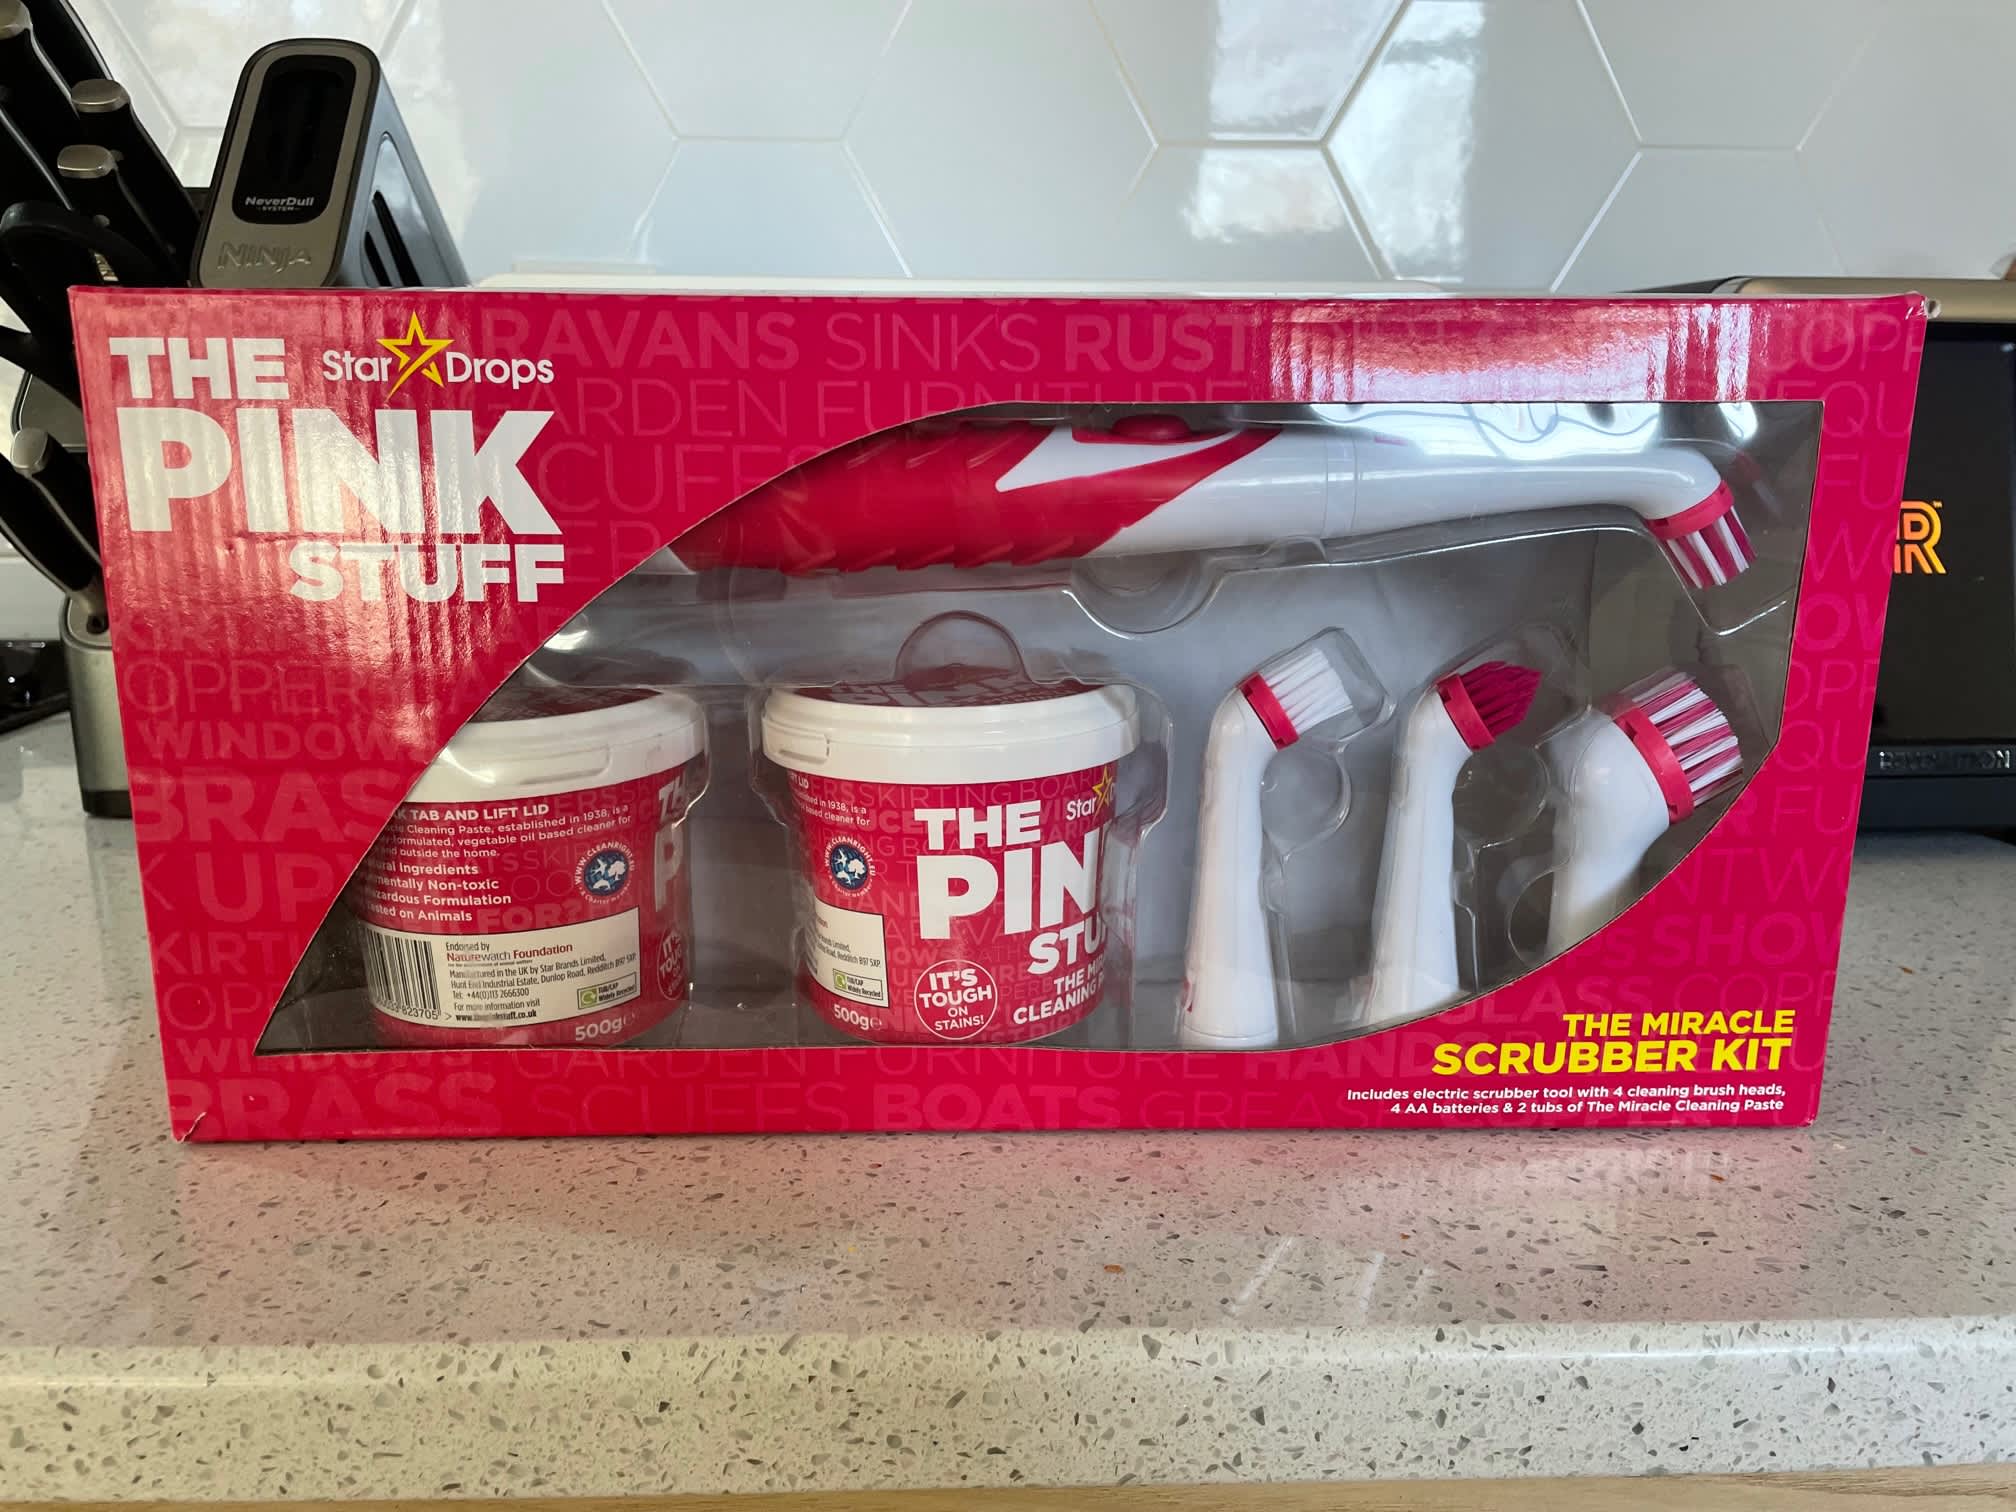 https://cdn.apartmenttherapy.info/image/upload/v1648500165/k/Edit/2022-04-Pink-Stuff-Grout-Cleaner-Review/IMG_0429.jpg